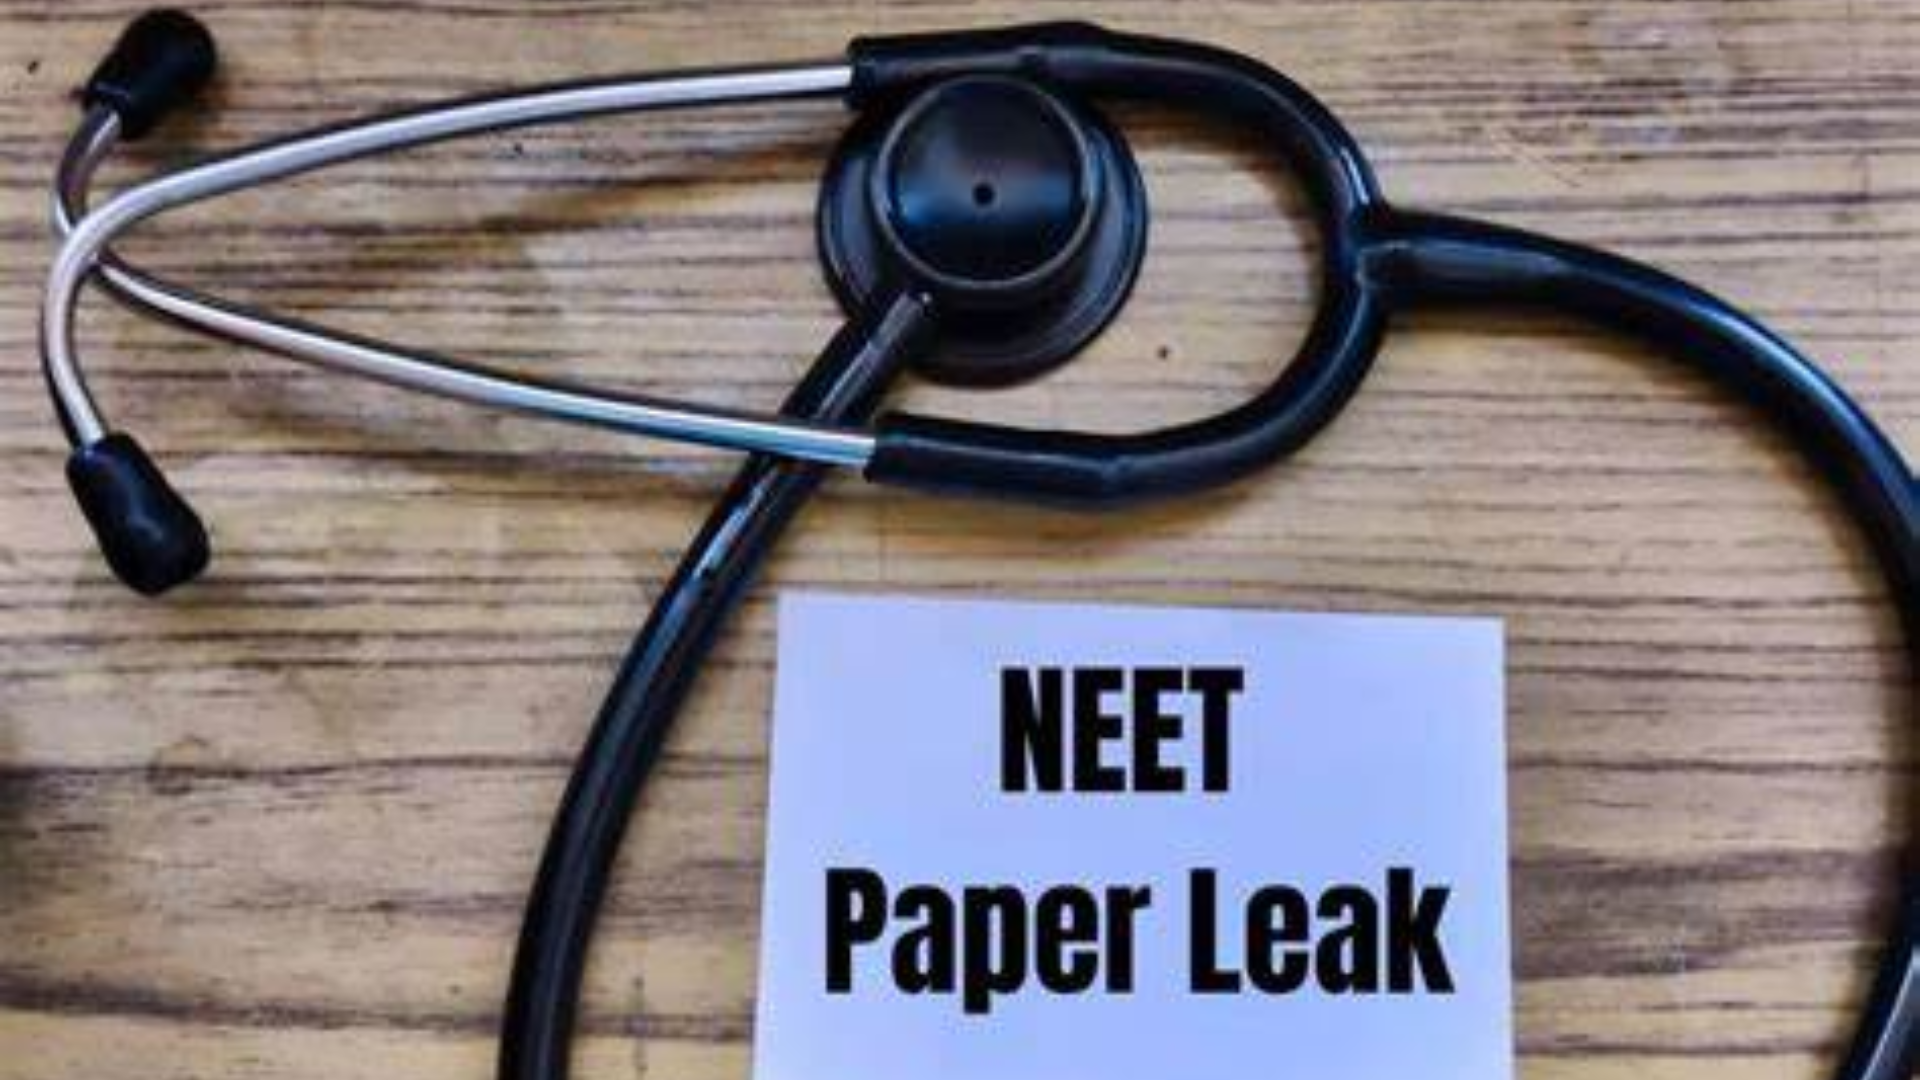 NEET Probe Update: School Faces Scrutiny as Digital Lock Failure Leads to Cutter Use on Question Paper Box